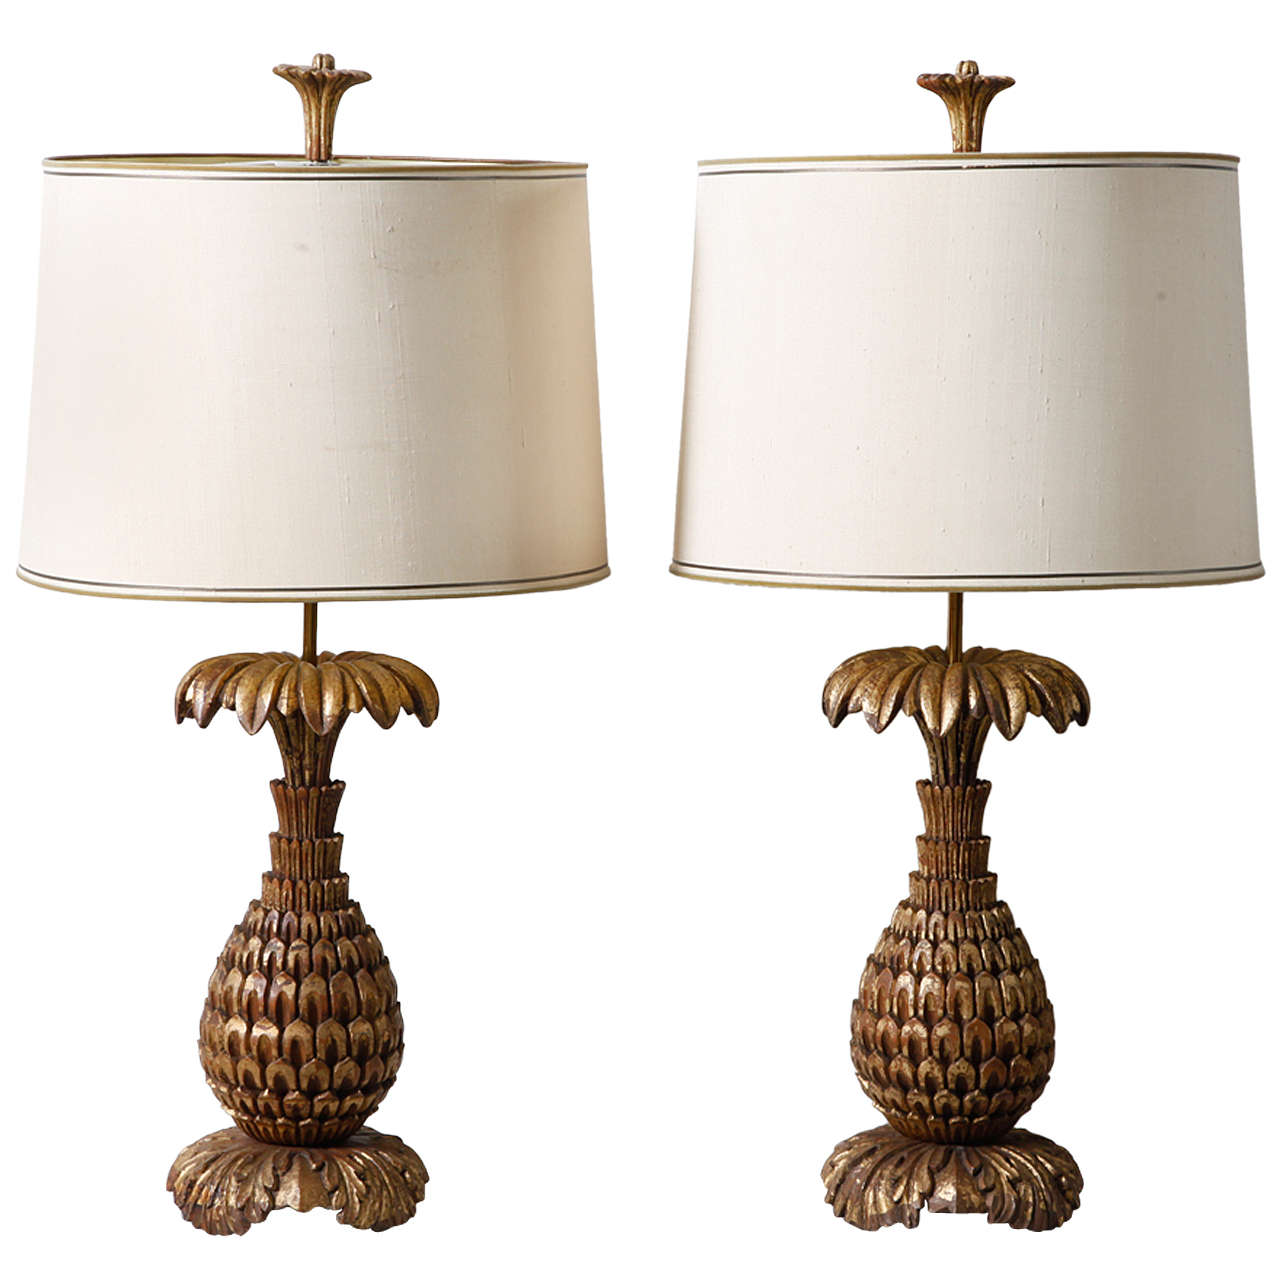 Pair Of Pineapple-shaped Table-lamps For Sale